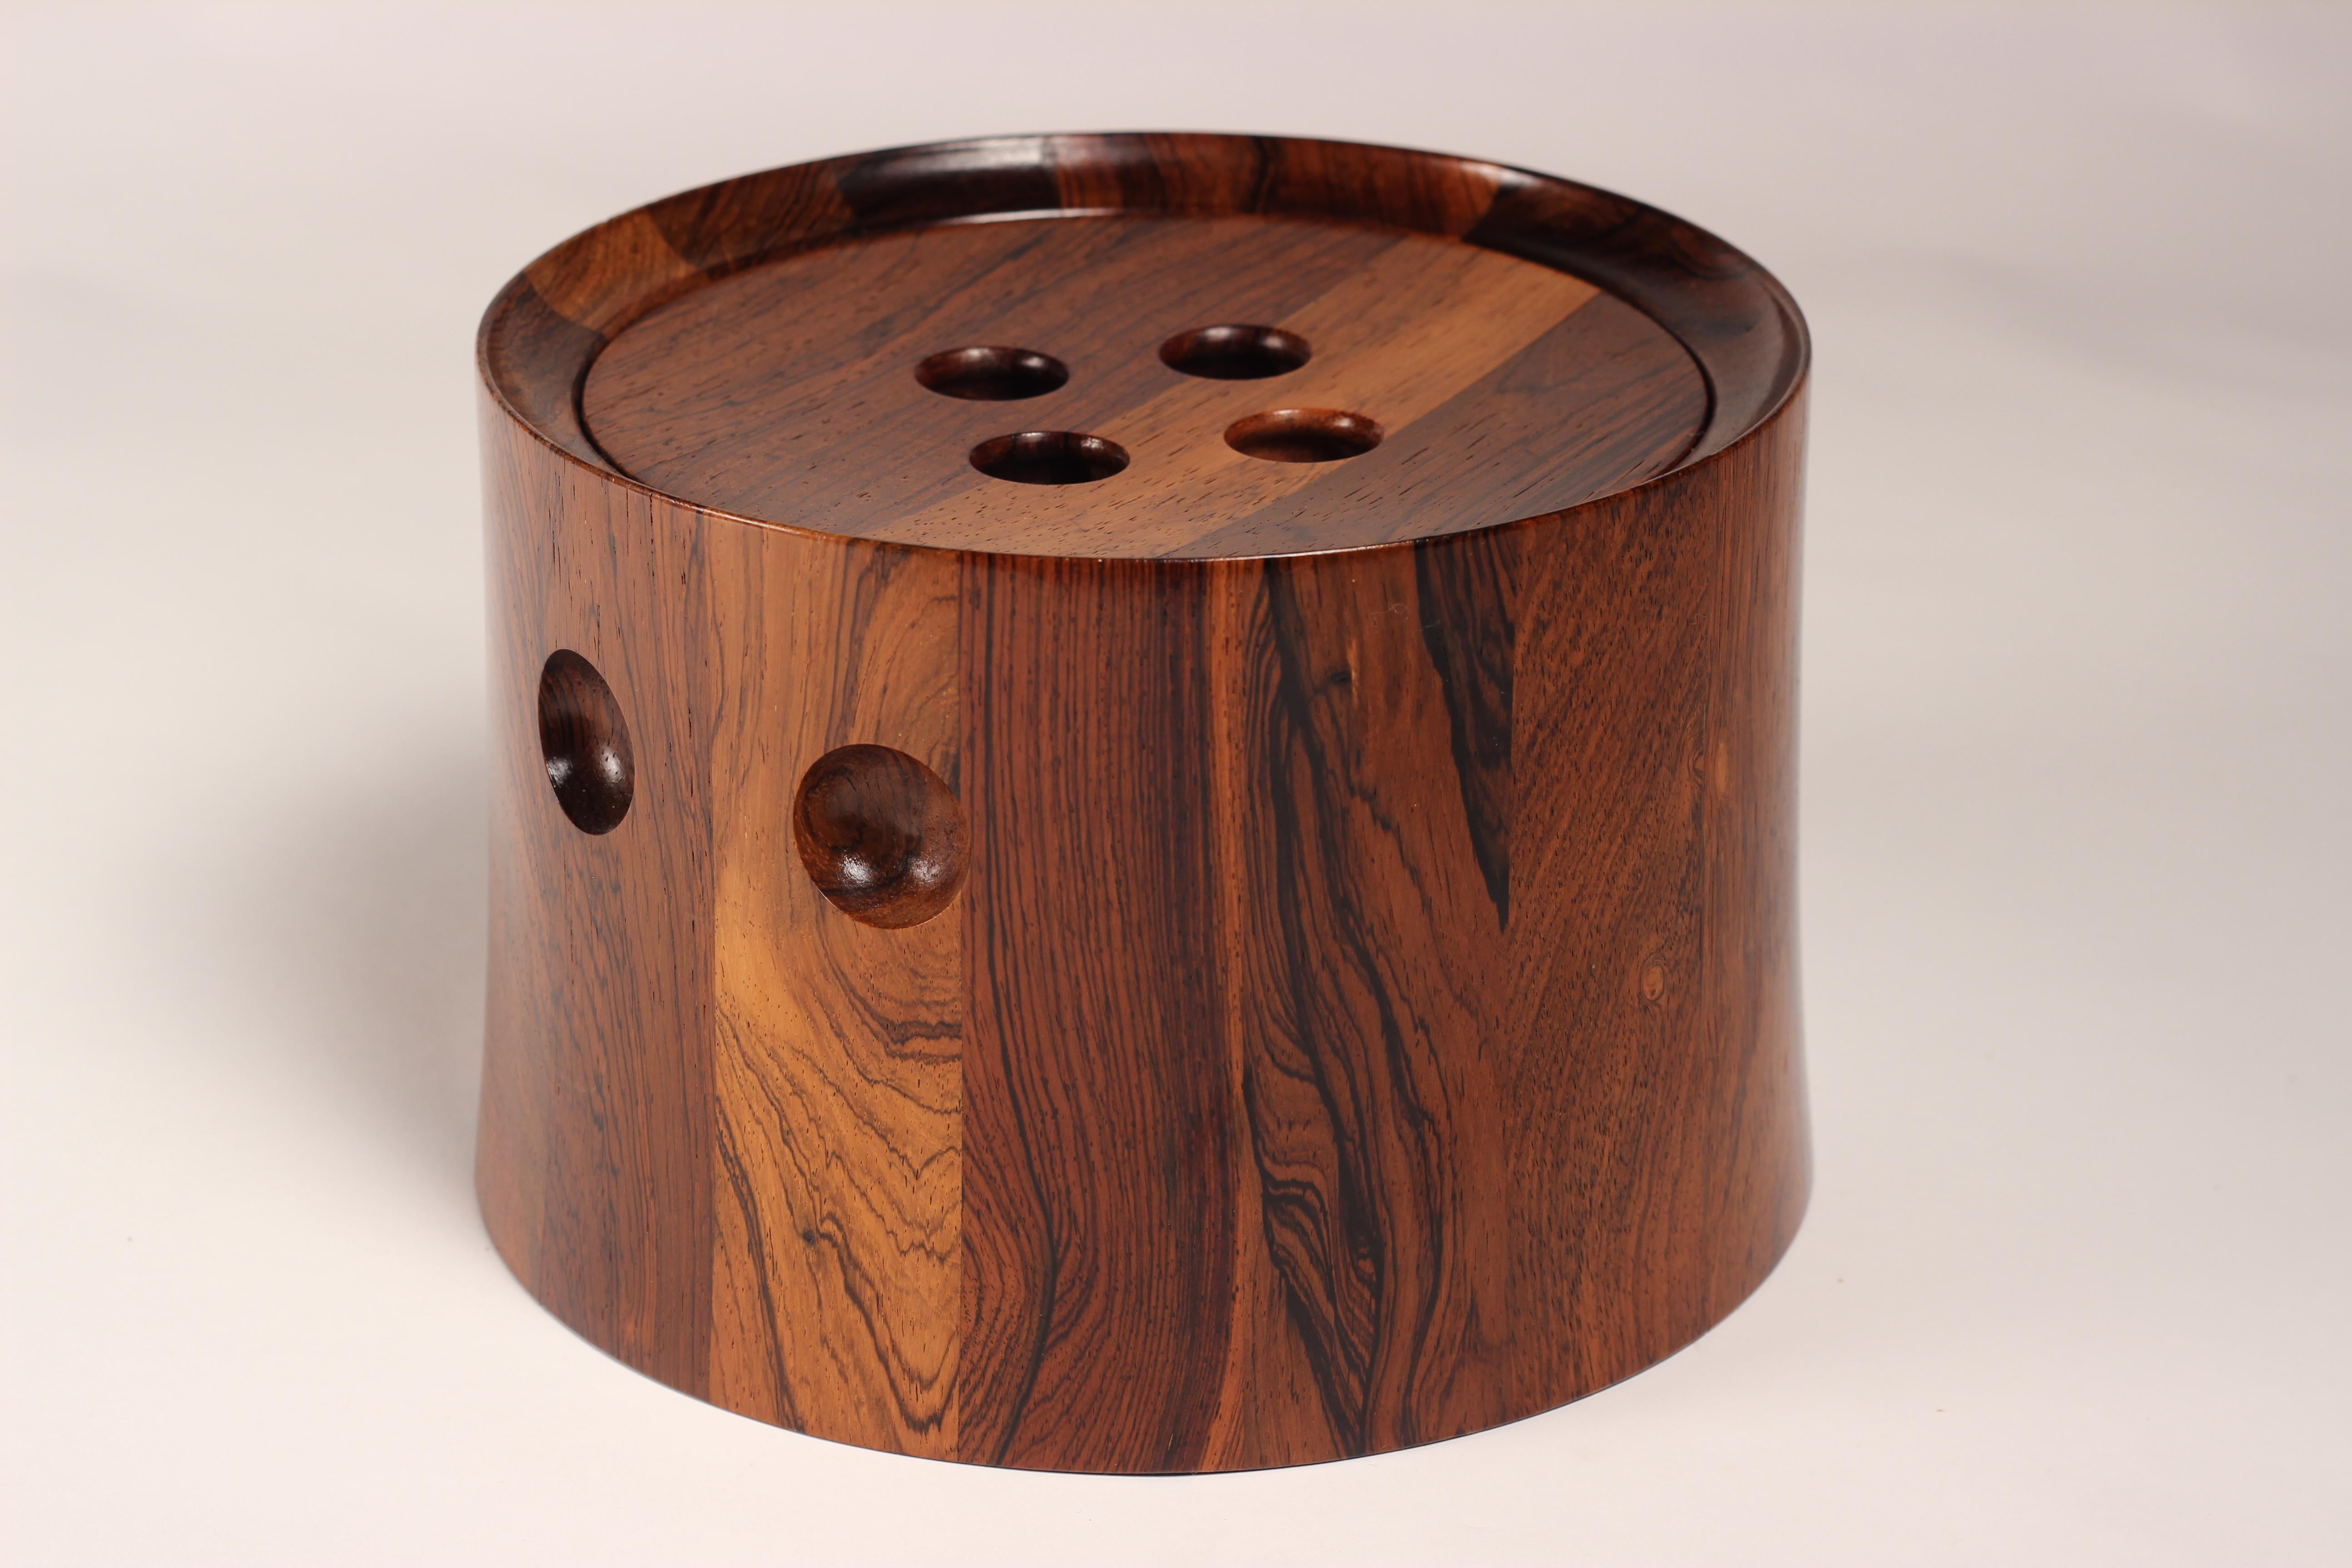 Scandinavian Modern rosewood ice bucket designed by Jens Quistgaard a master of sculptural paired back and beautifully simplistic forms. This rosewood ice bucket has had its wood sympathetically and selectively chosen in order to create an